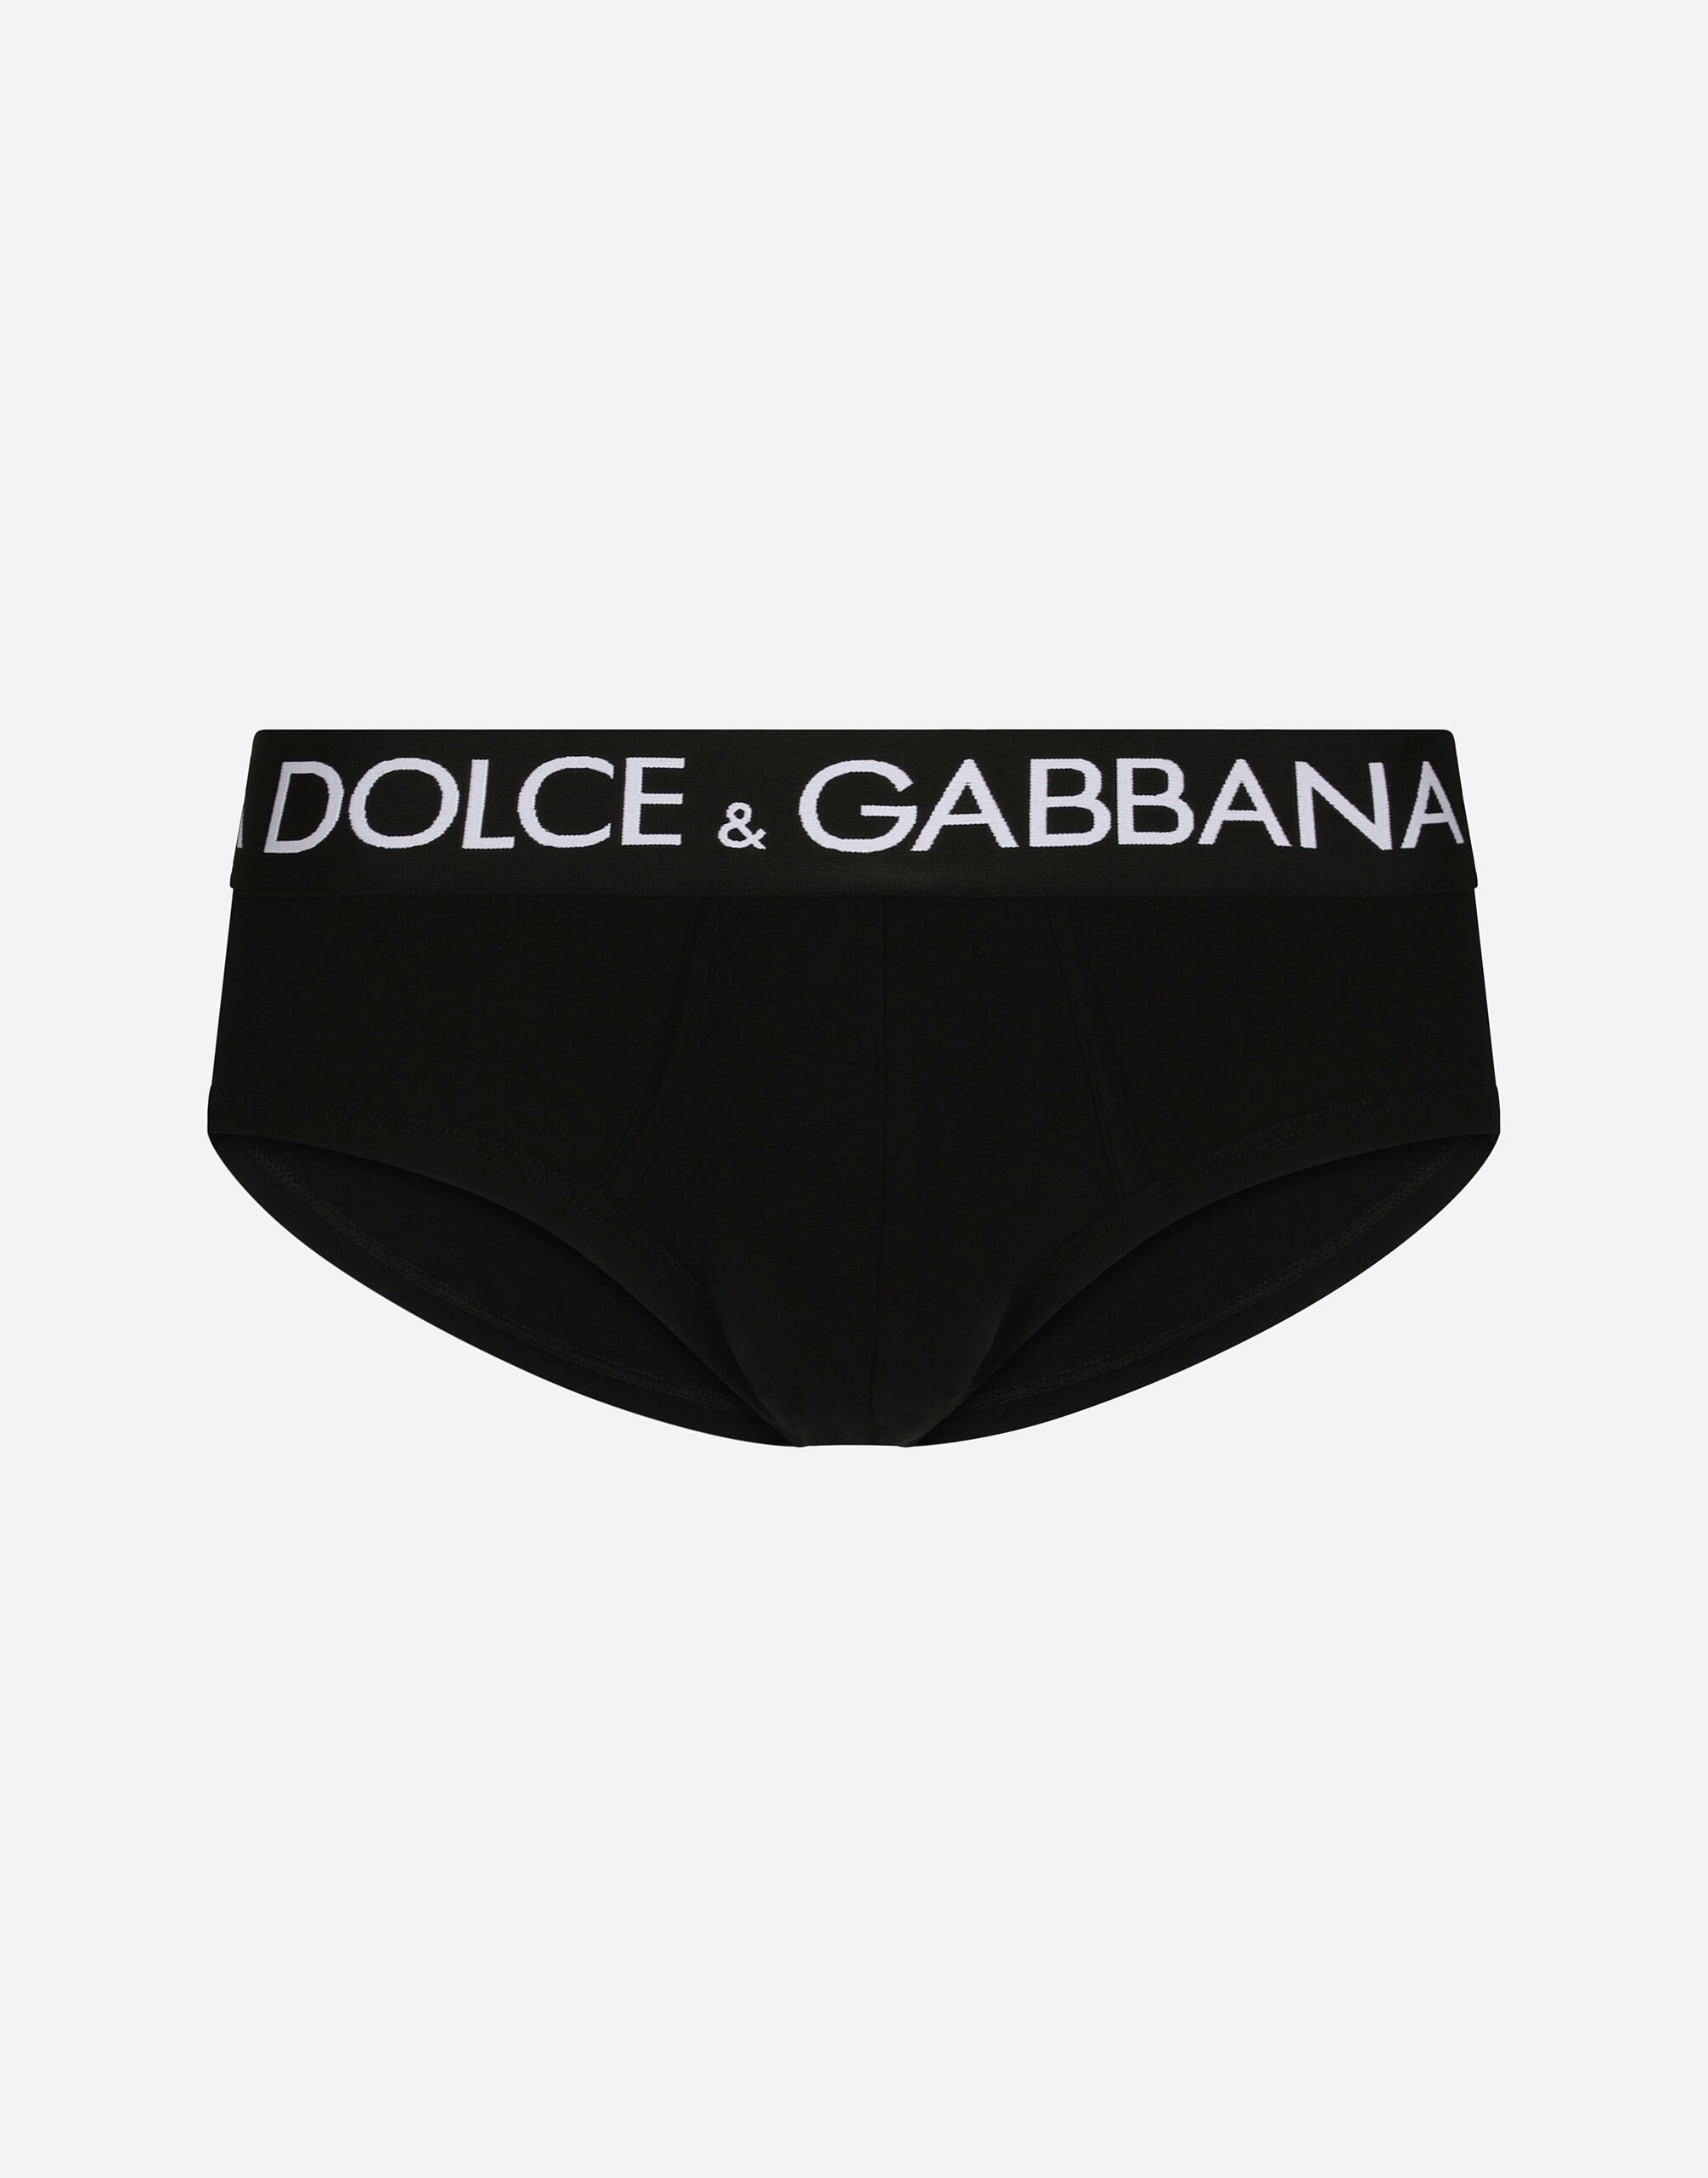 Dolce And Gabbana, Men's Underwear, White, Size Extra Large 7 US Authentic